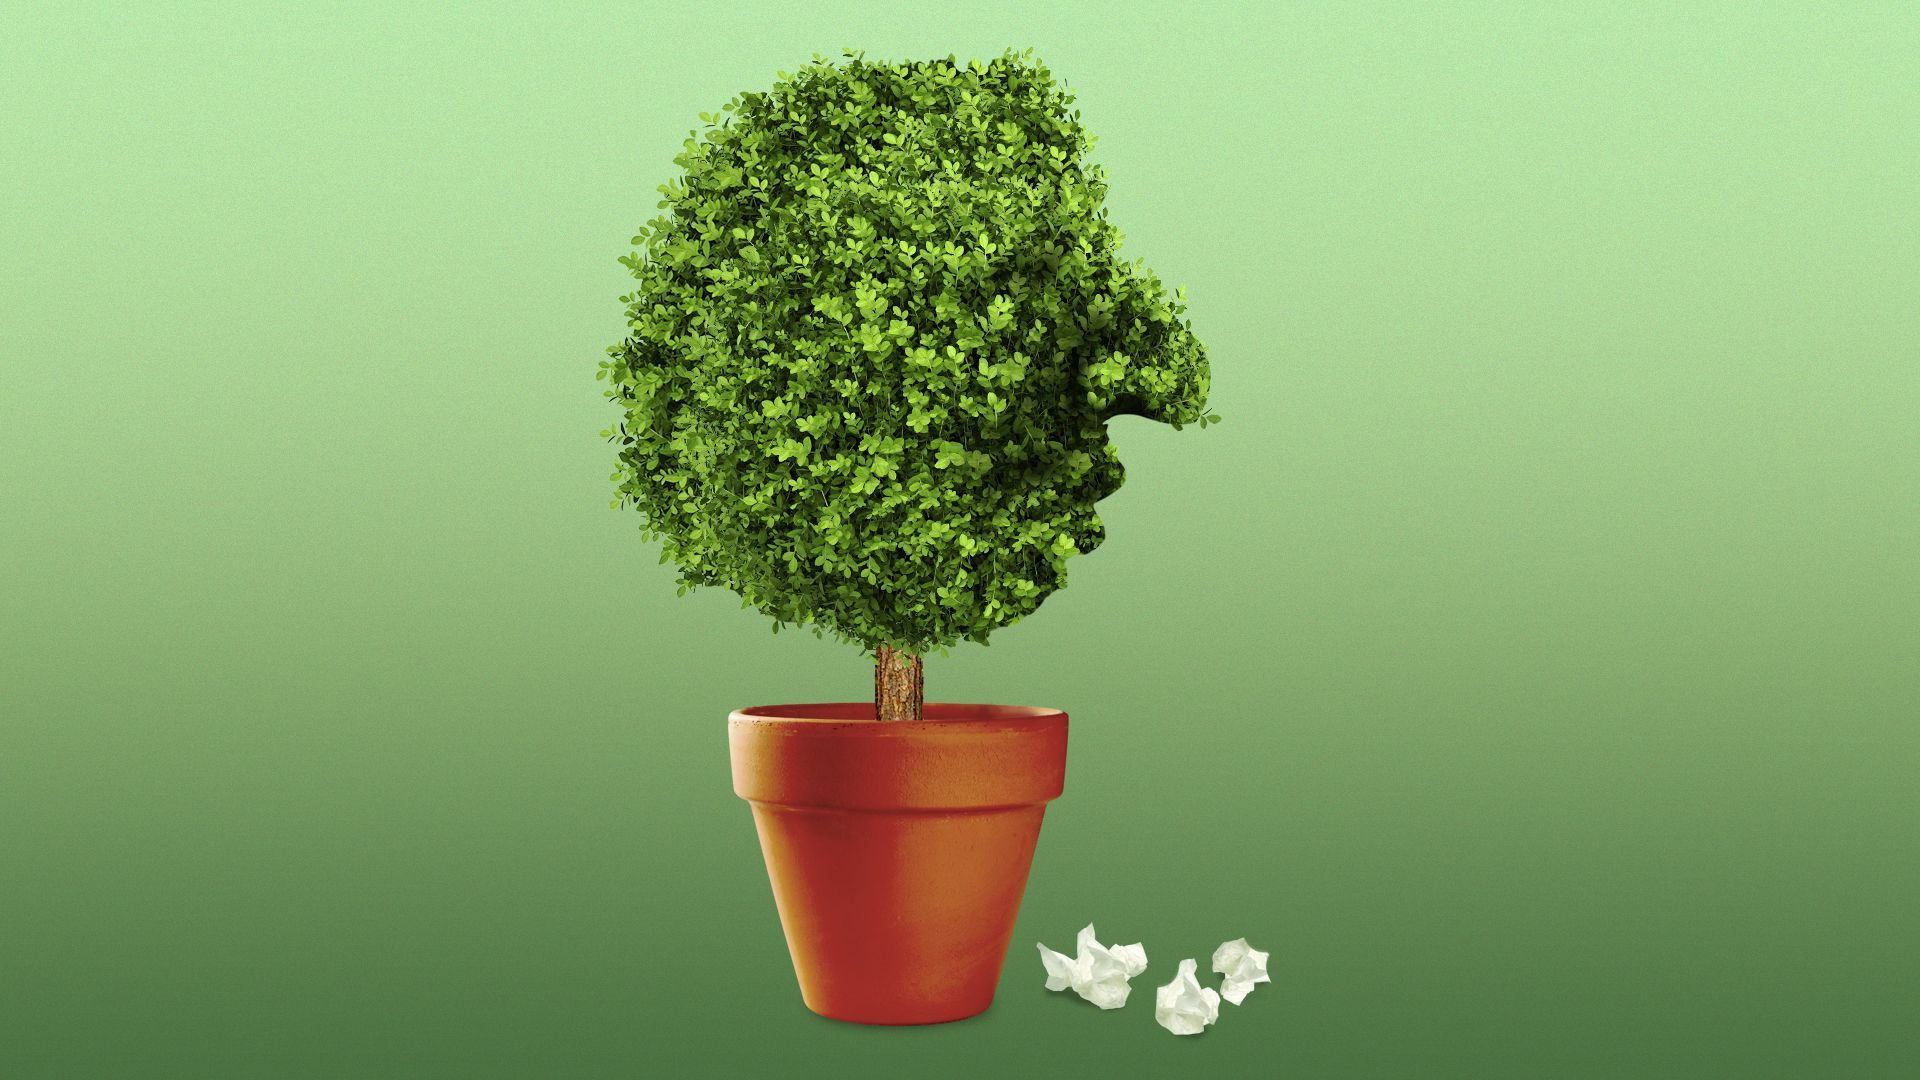 Illustration of a tree pruned in the shape of a head with a large nose, with used tissues next to its pot.